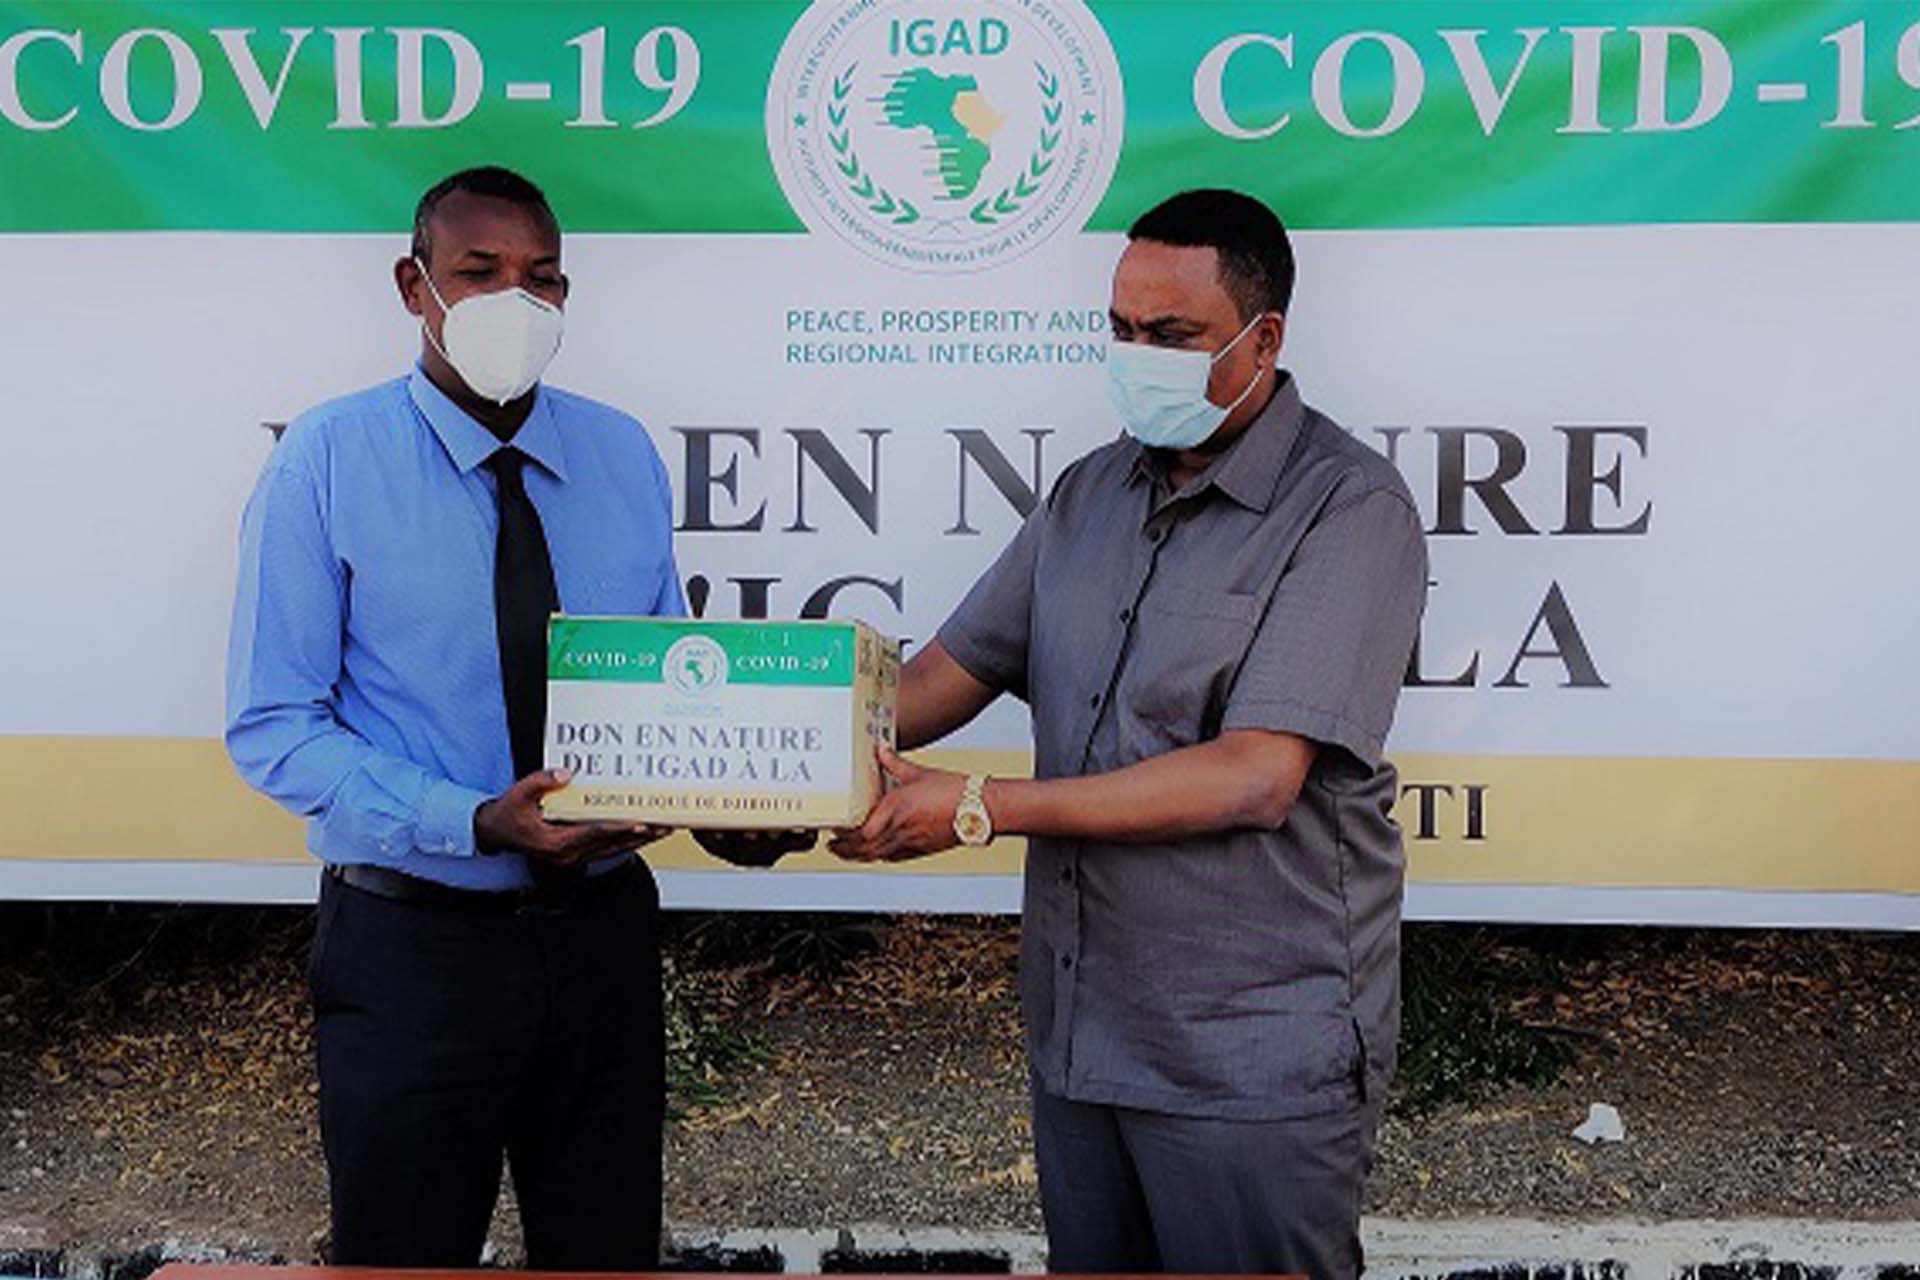 IGAD Executive Secretary Hands over PPE Kits to Refugee and Cross Border Populations